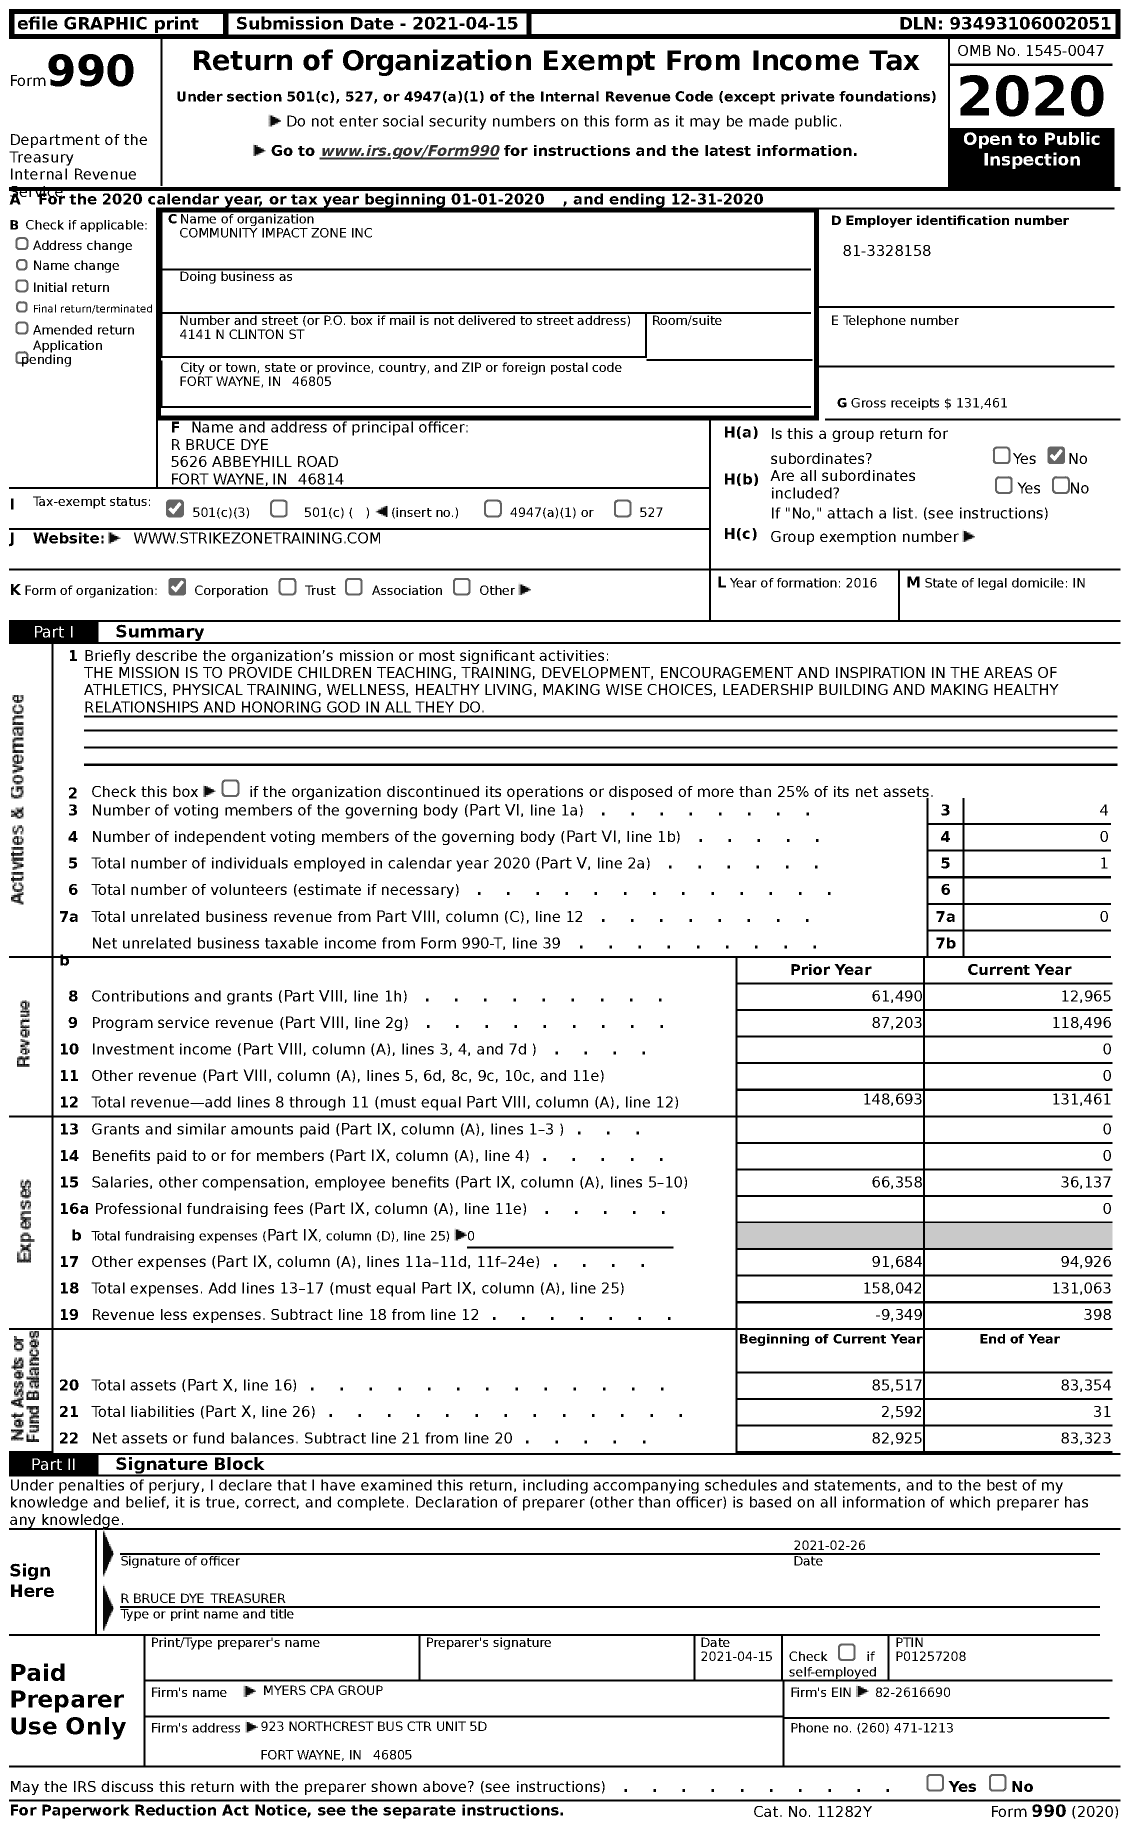 Image of first page of 2020 Form 990 for Community Impact Zone